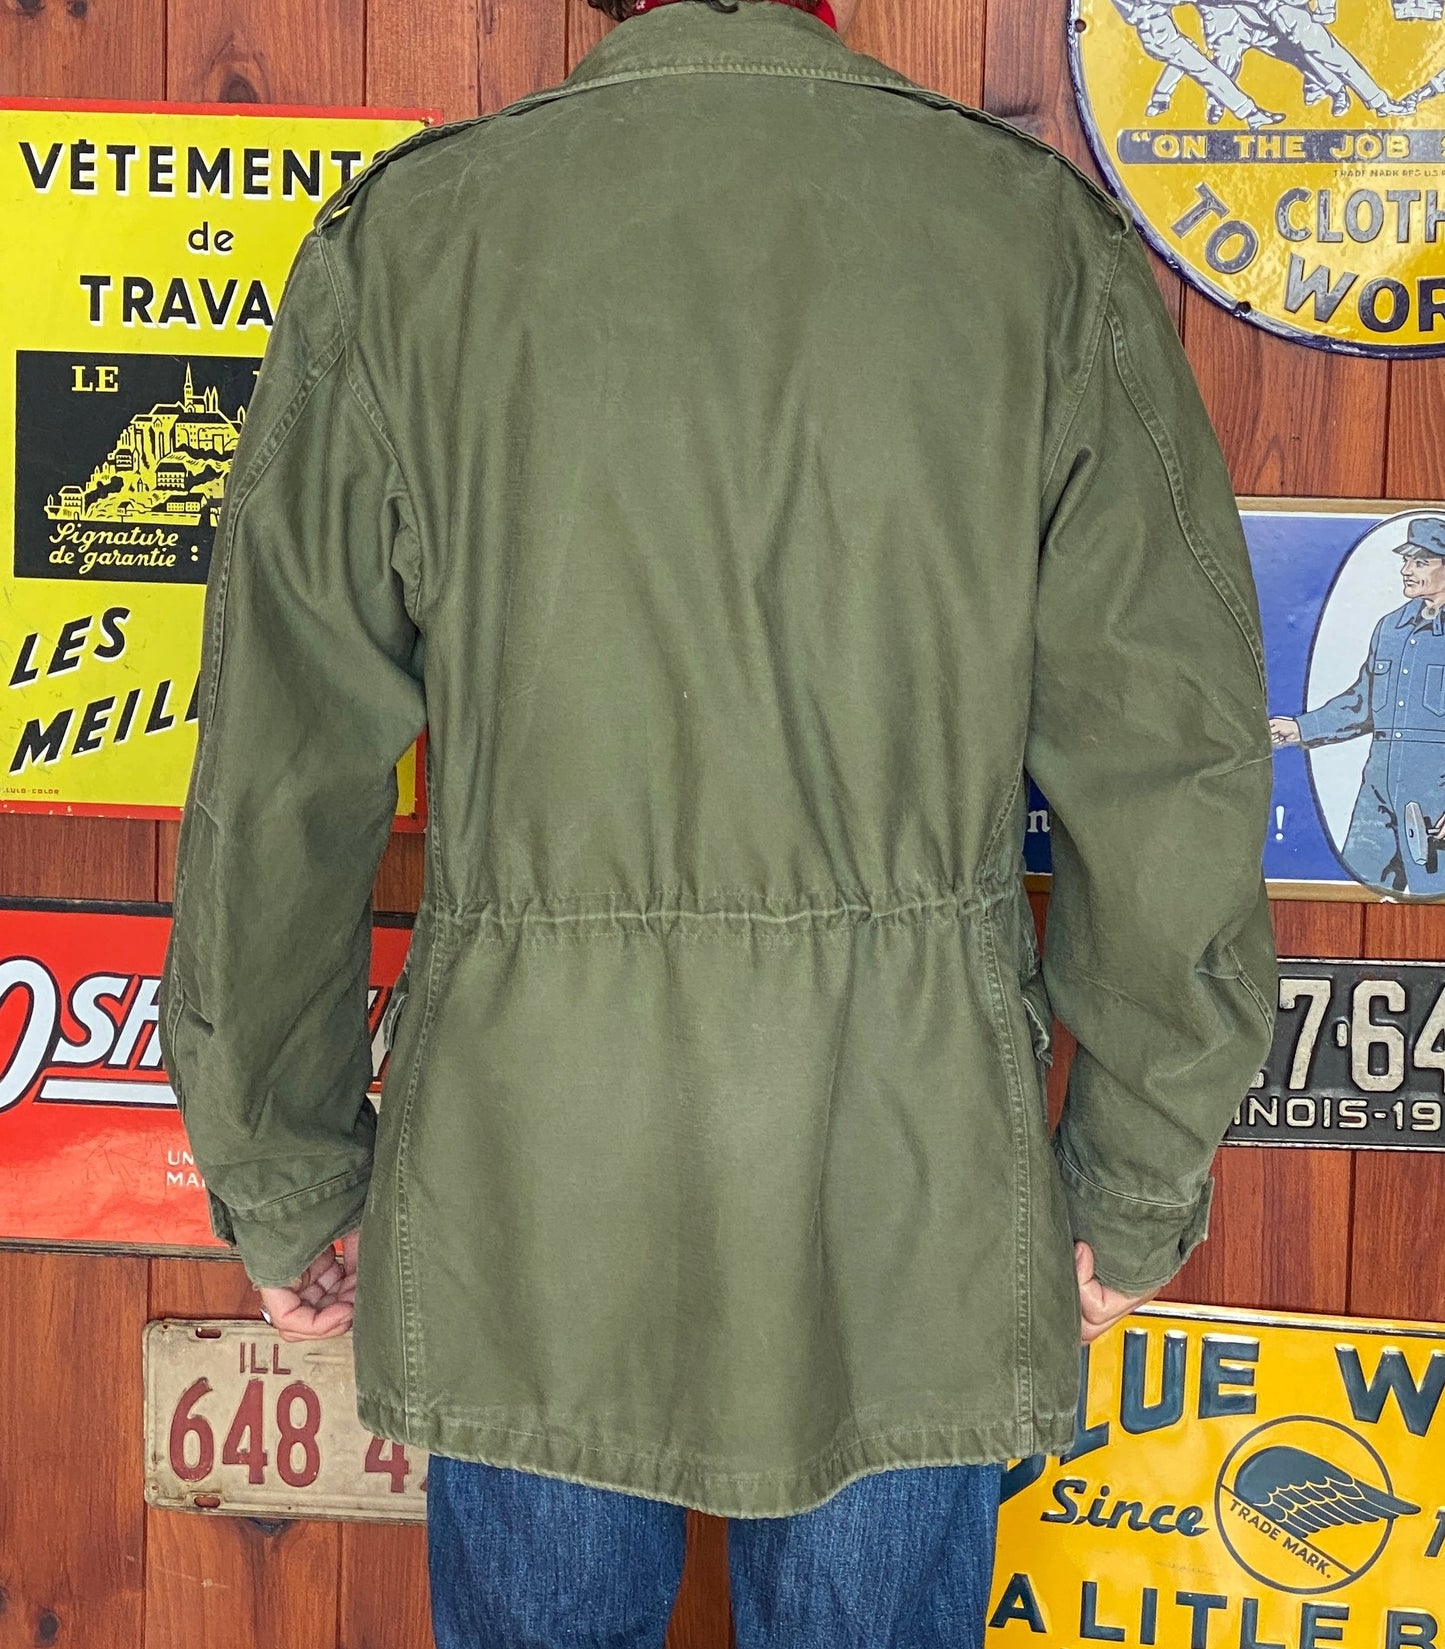 Medium long authentic 50s vintage US Army M-51 OG-107 jacket - classic military collectible.